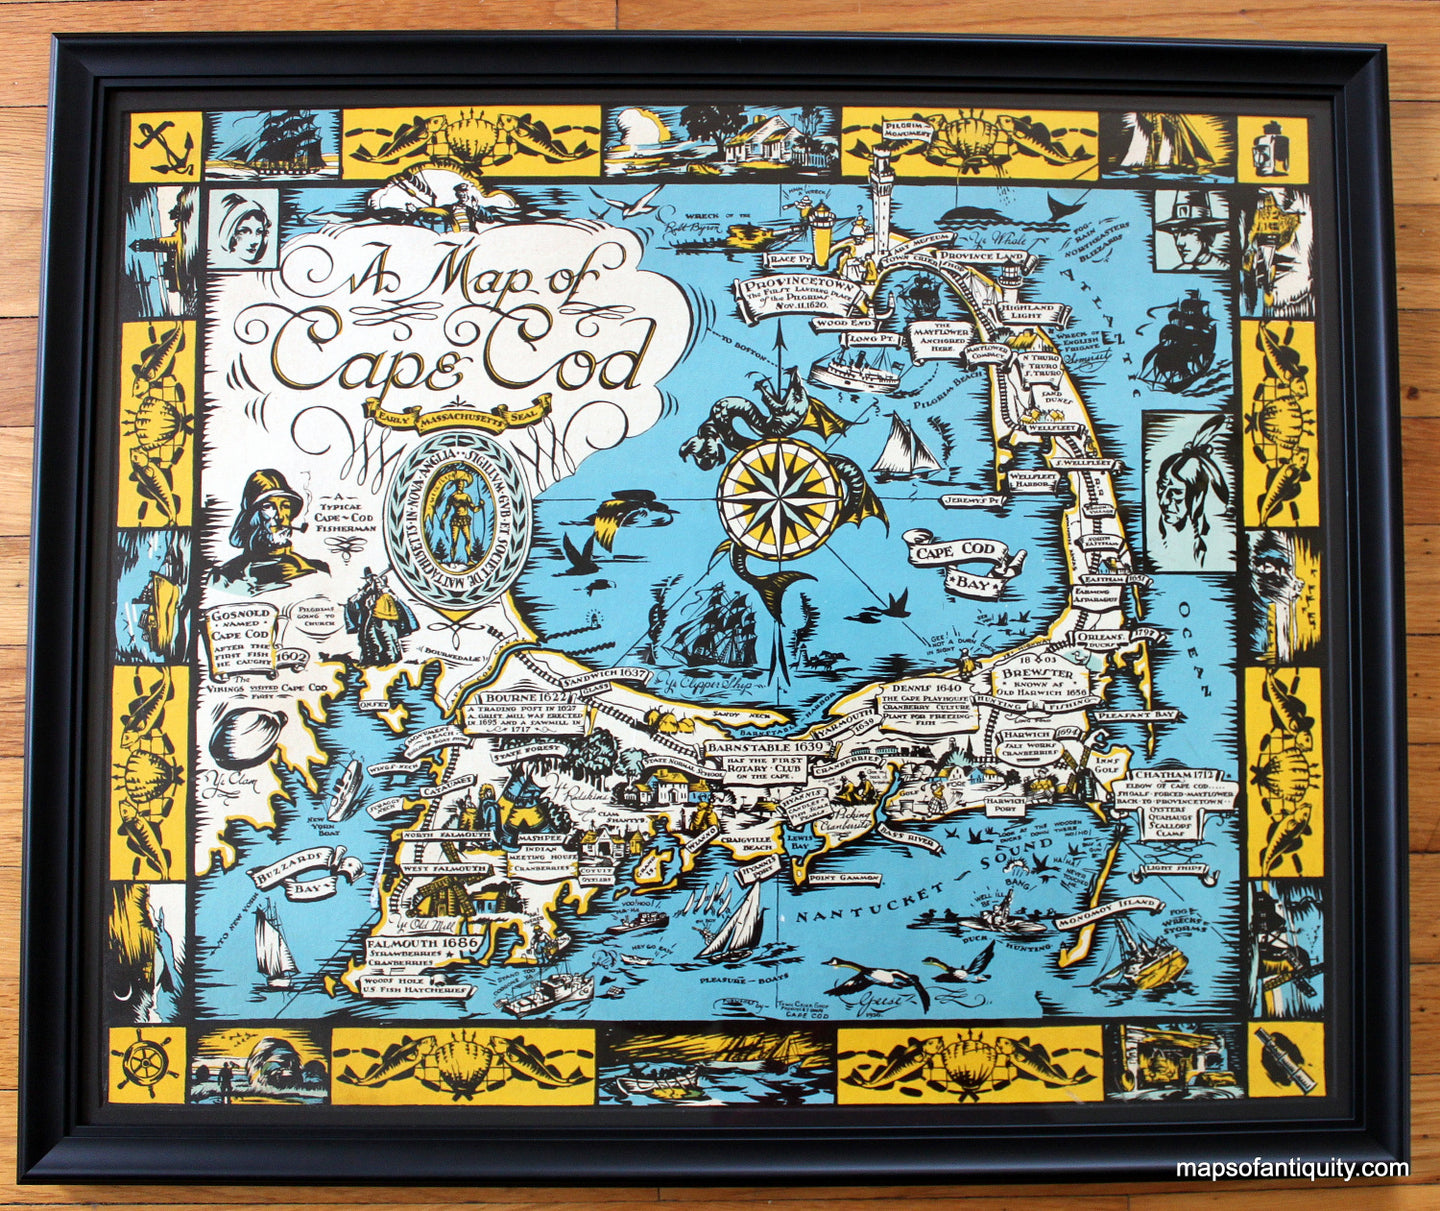 Antique-Map-Framed-on-Board-A-Map-of-Cape-Cod-**********-US-Massachusetts-Cape-Cod-and-Islands-1930-Town-Crier-Shop-of-Provincetown-Maps-Of-Antiquity